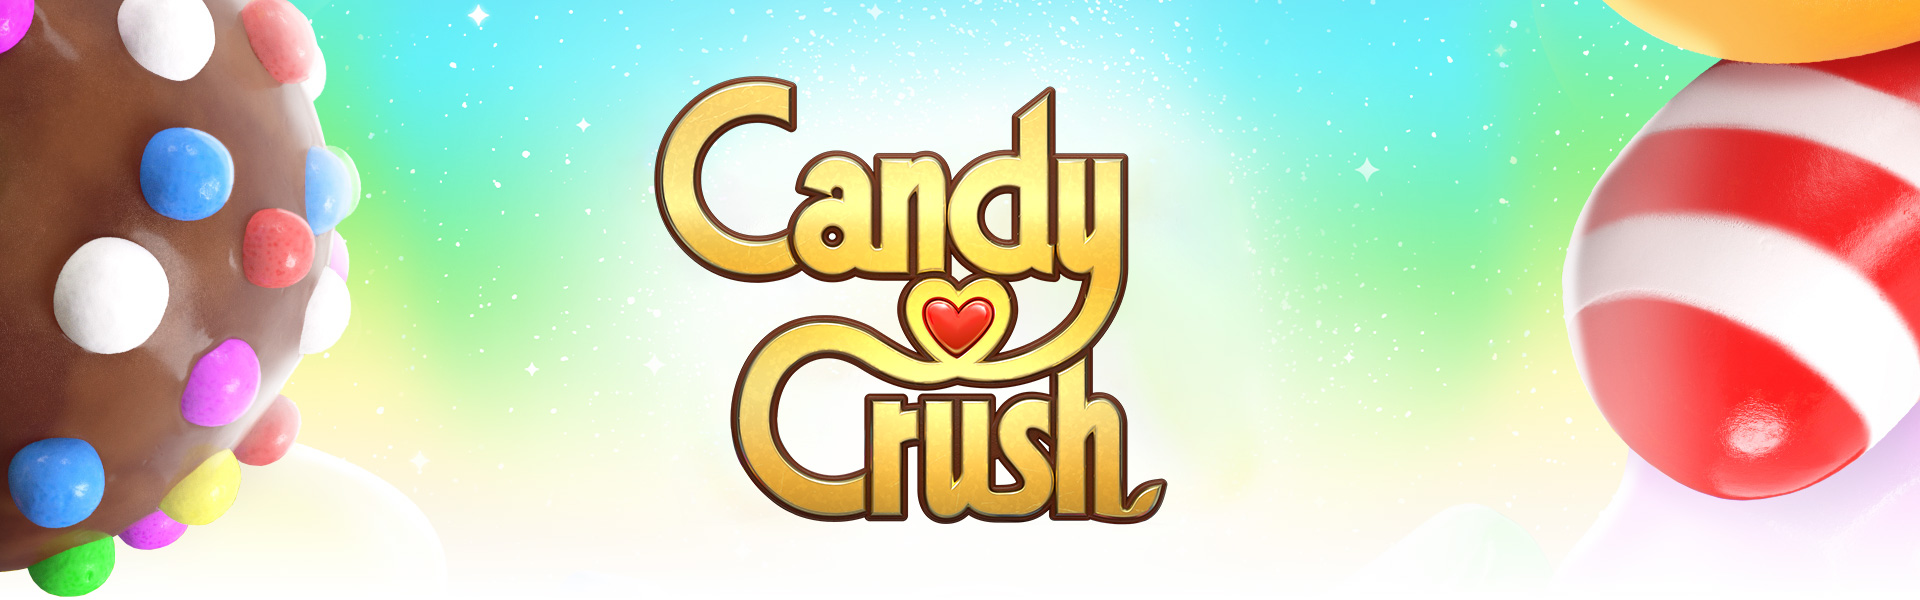 Candy crush logo surrounded by chocolates and hard candies